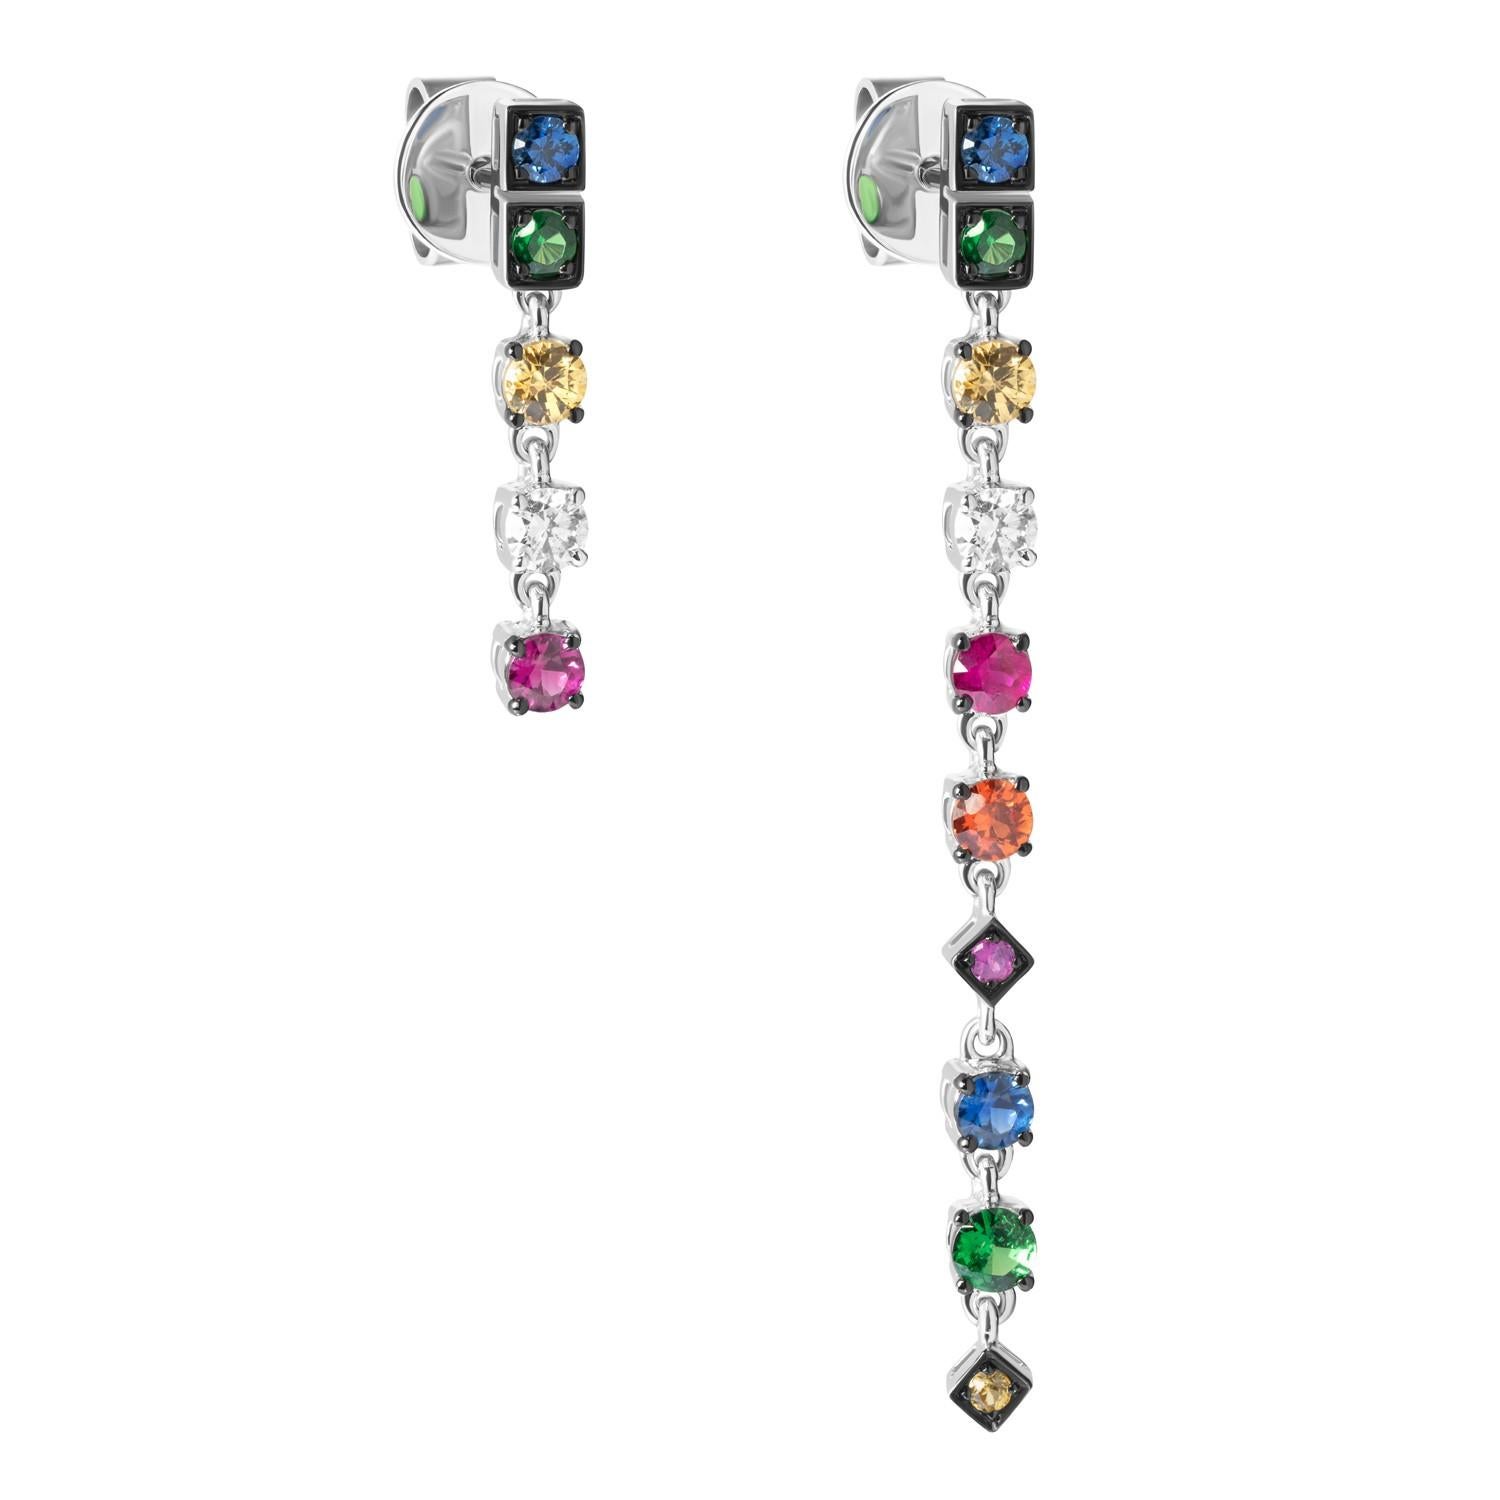 Earrings White Gold 14 K 

Diamond 2-RND-0,12-F/VS2A 
Tsavorite 3-RND-0,15 2/3
Ruby 2-RND-0,12 Т(5)/3
Blue Sapphire 3-RND-0,13 Т(5)/3

Weight 2.22 grams

With a heritage of ancient fine Swiss jewelry traditions, NATKINA is a Geneva based jewellery